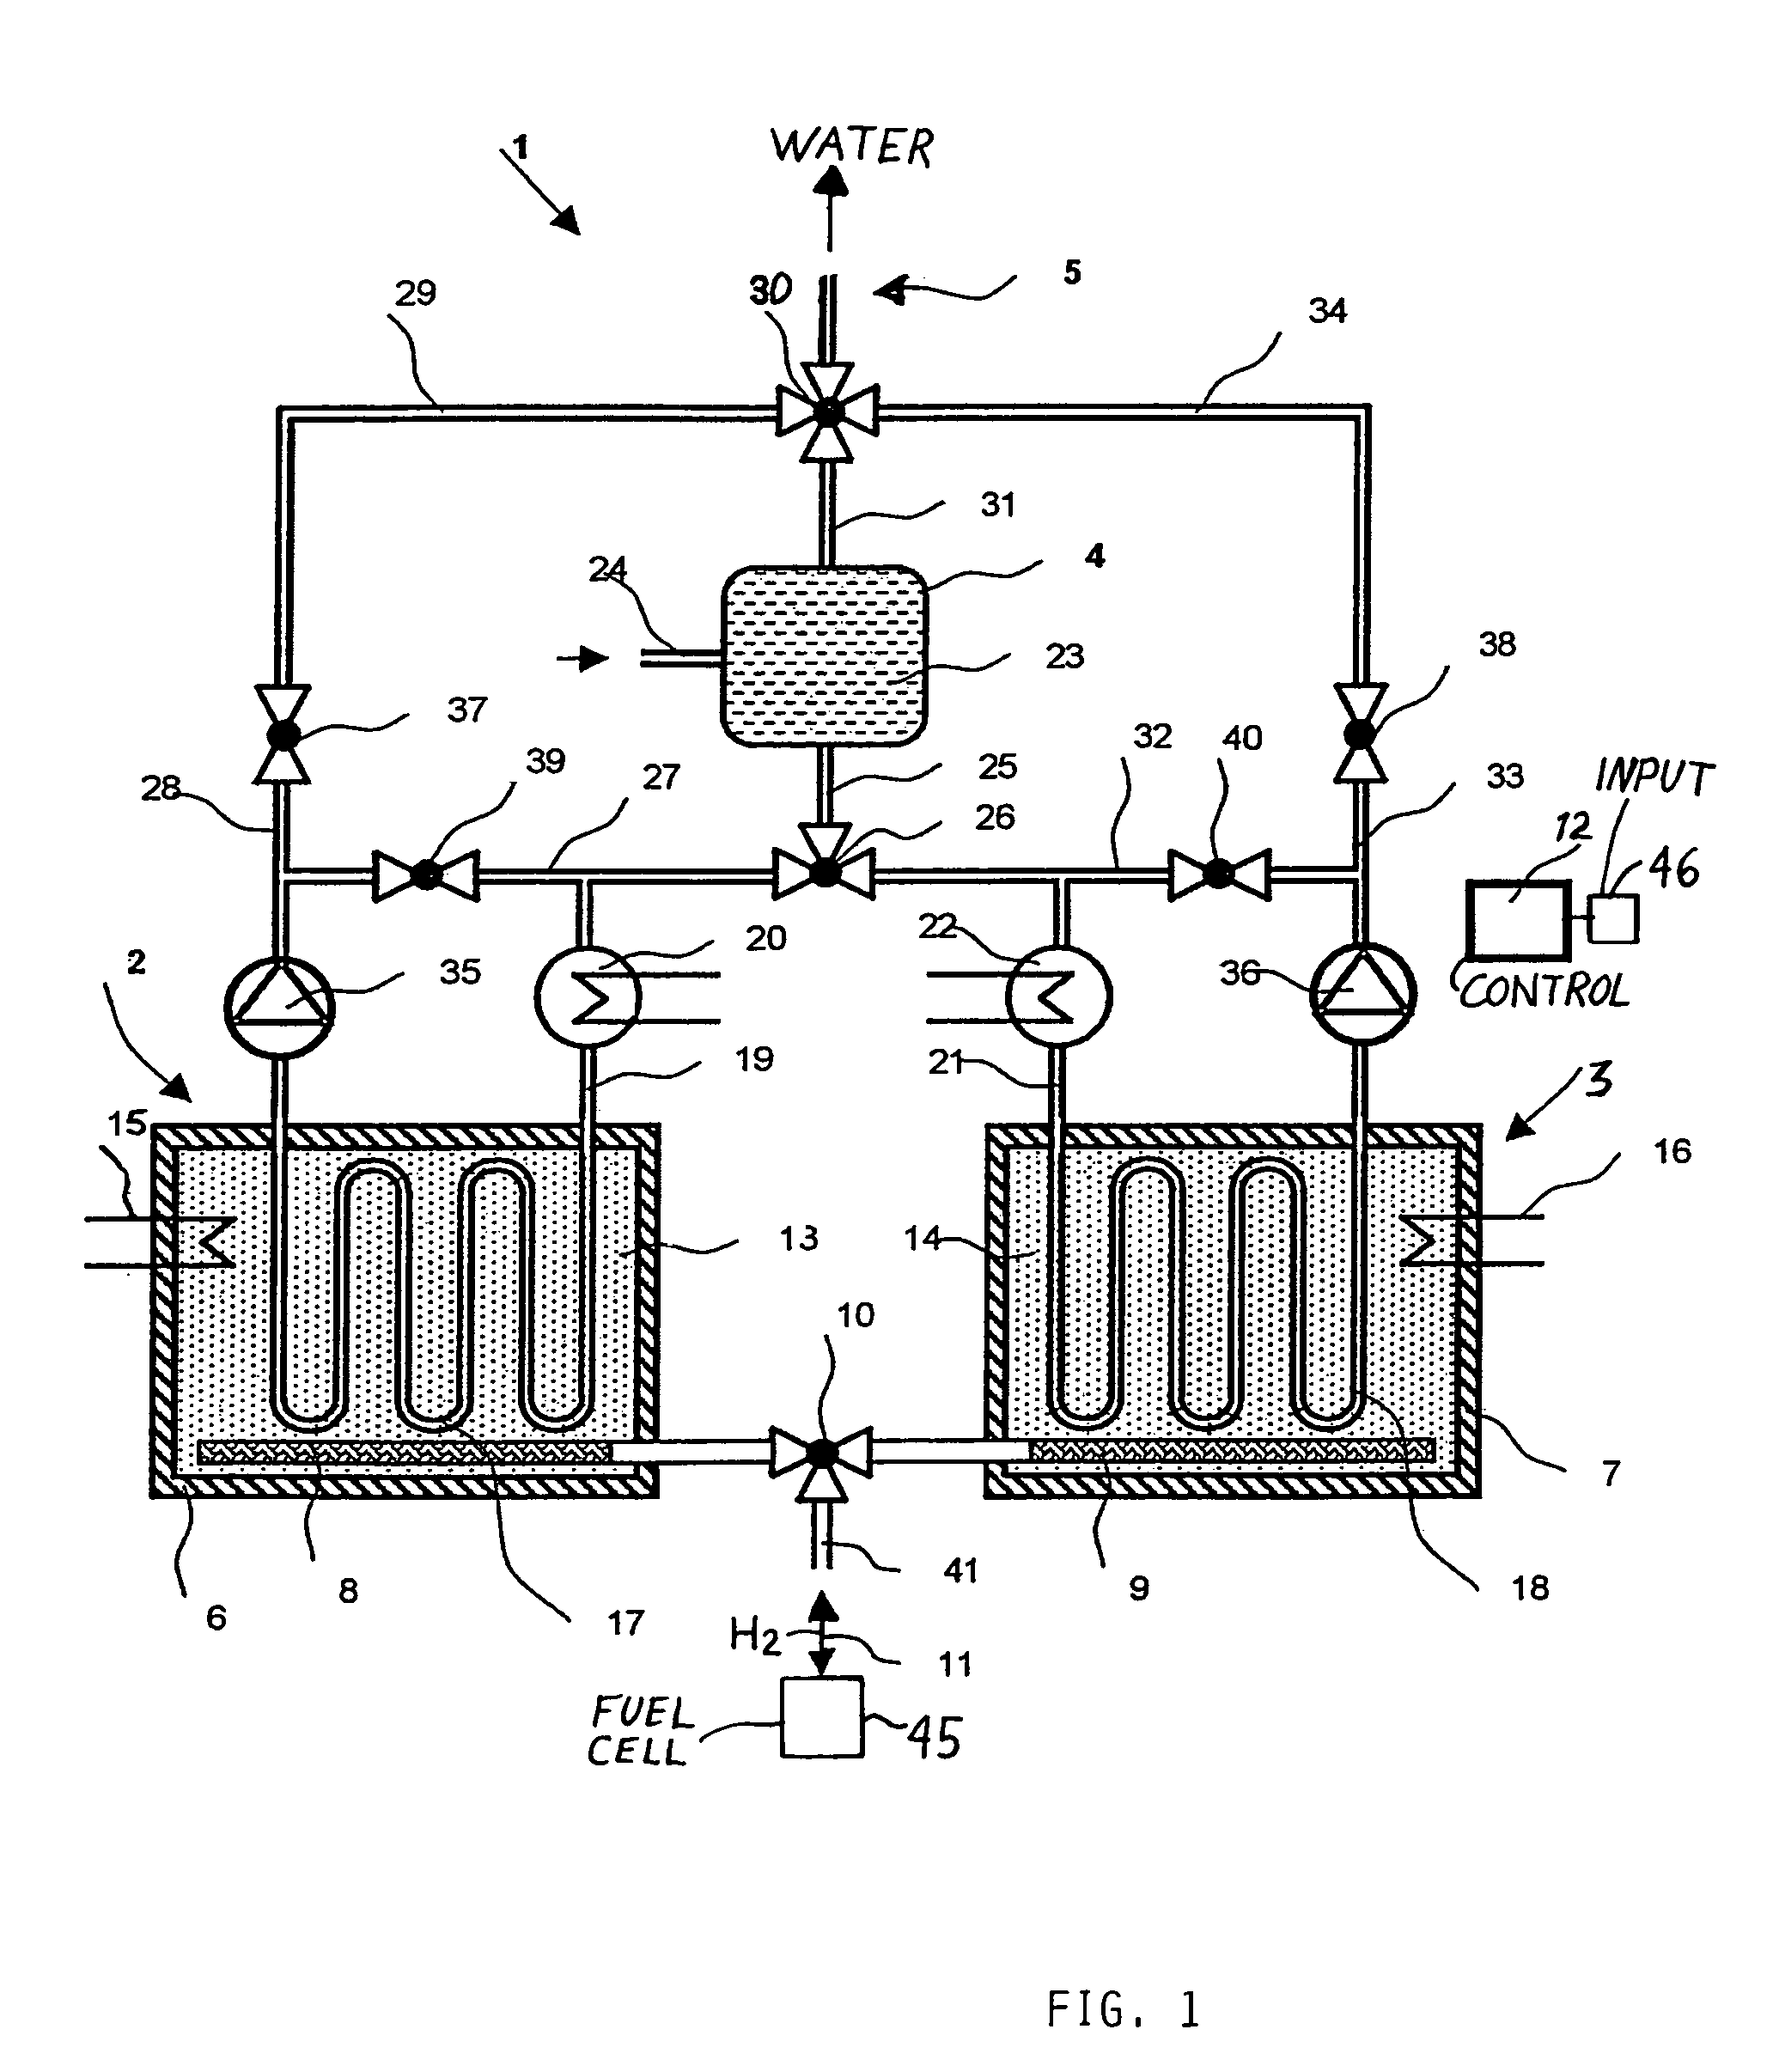 Method and apparatus for tempering gaseous and/or liquid media in transportation vehicles, particularly in aircraft